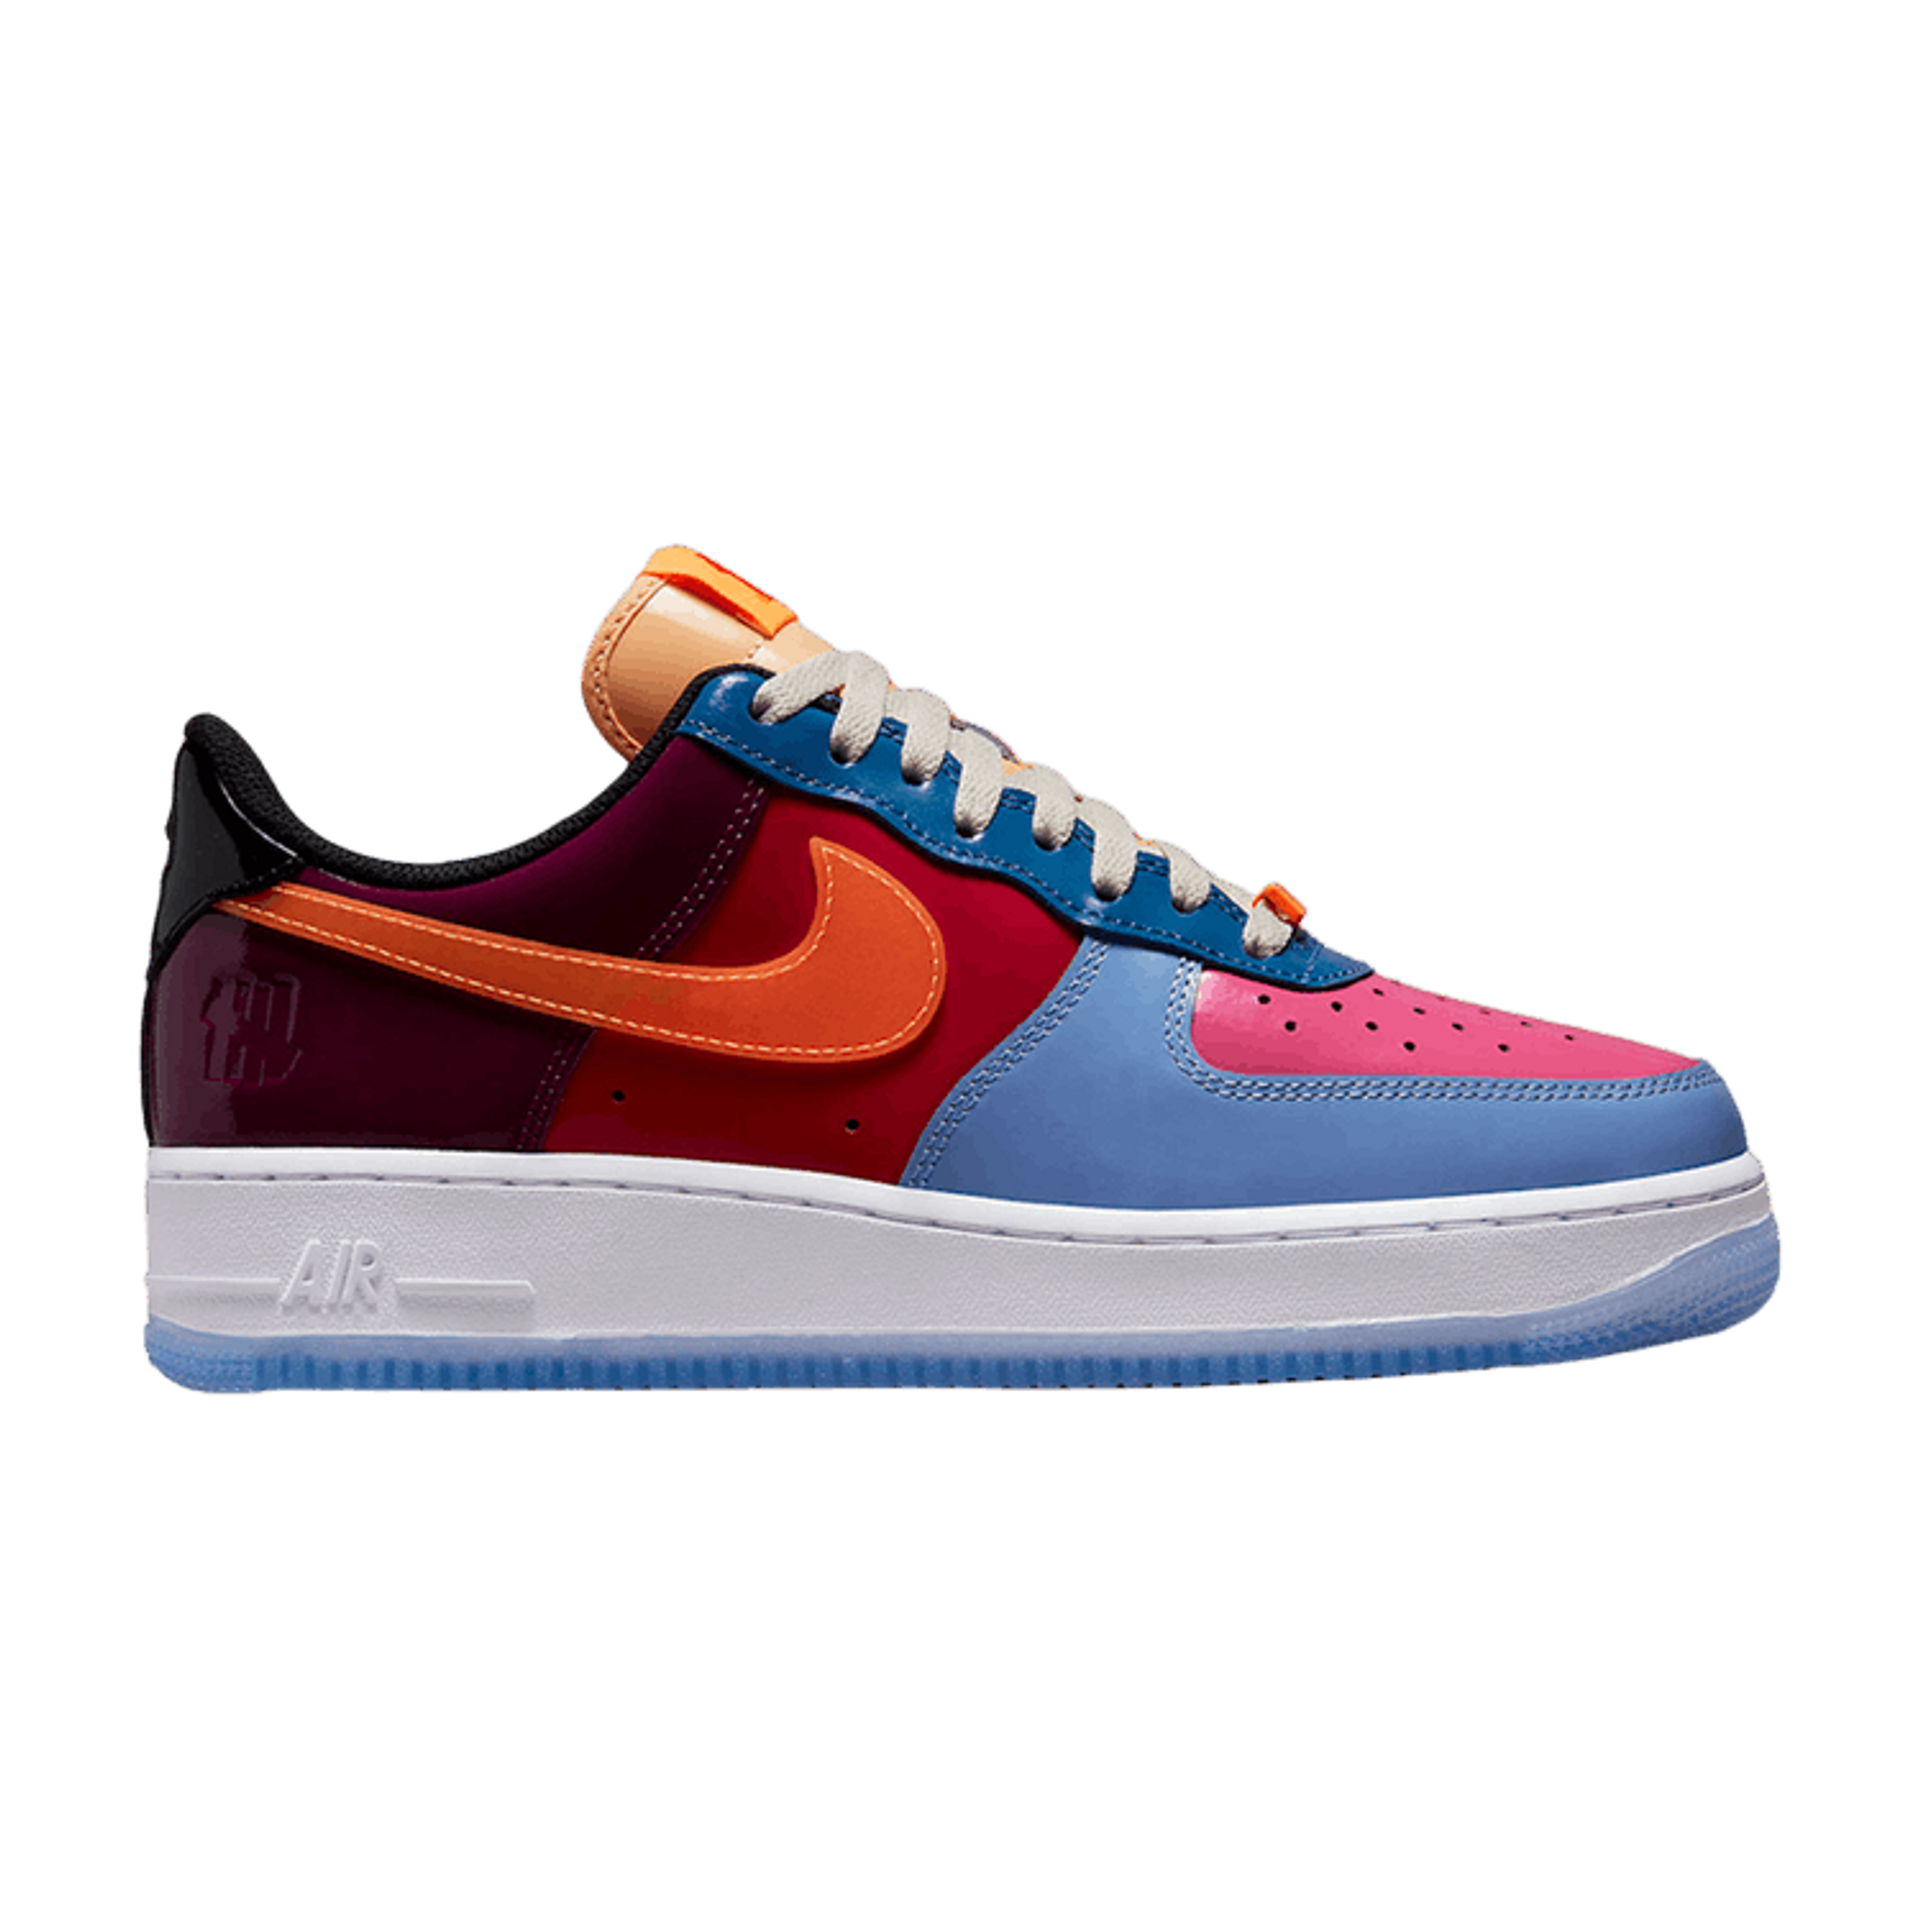 Undefeated x Nike Air Force 1 Low 'Total Orange' - DV5255 400 | Ox Street